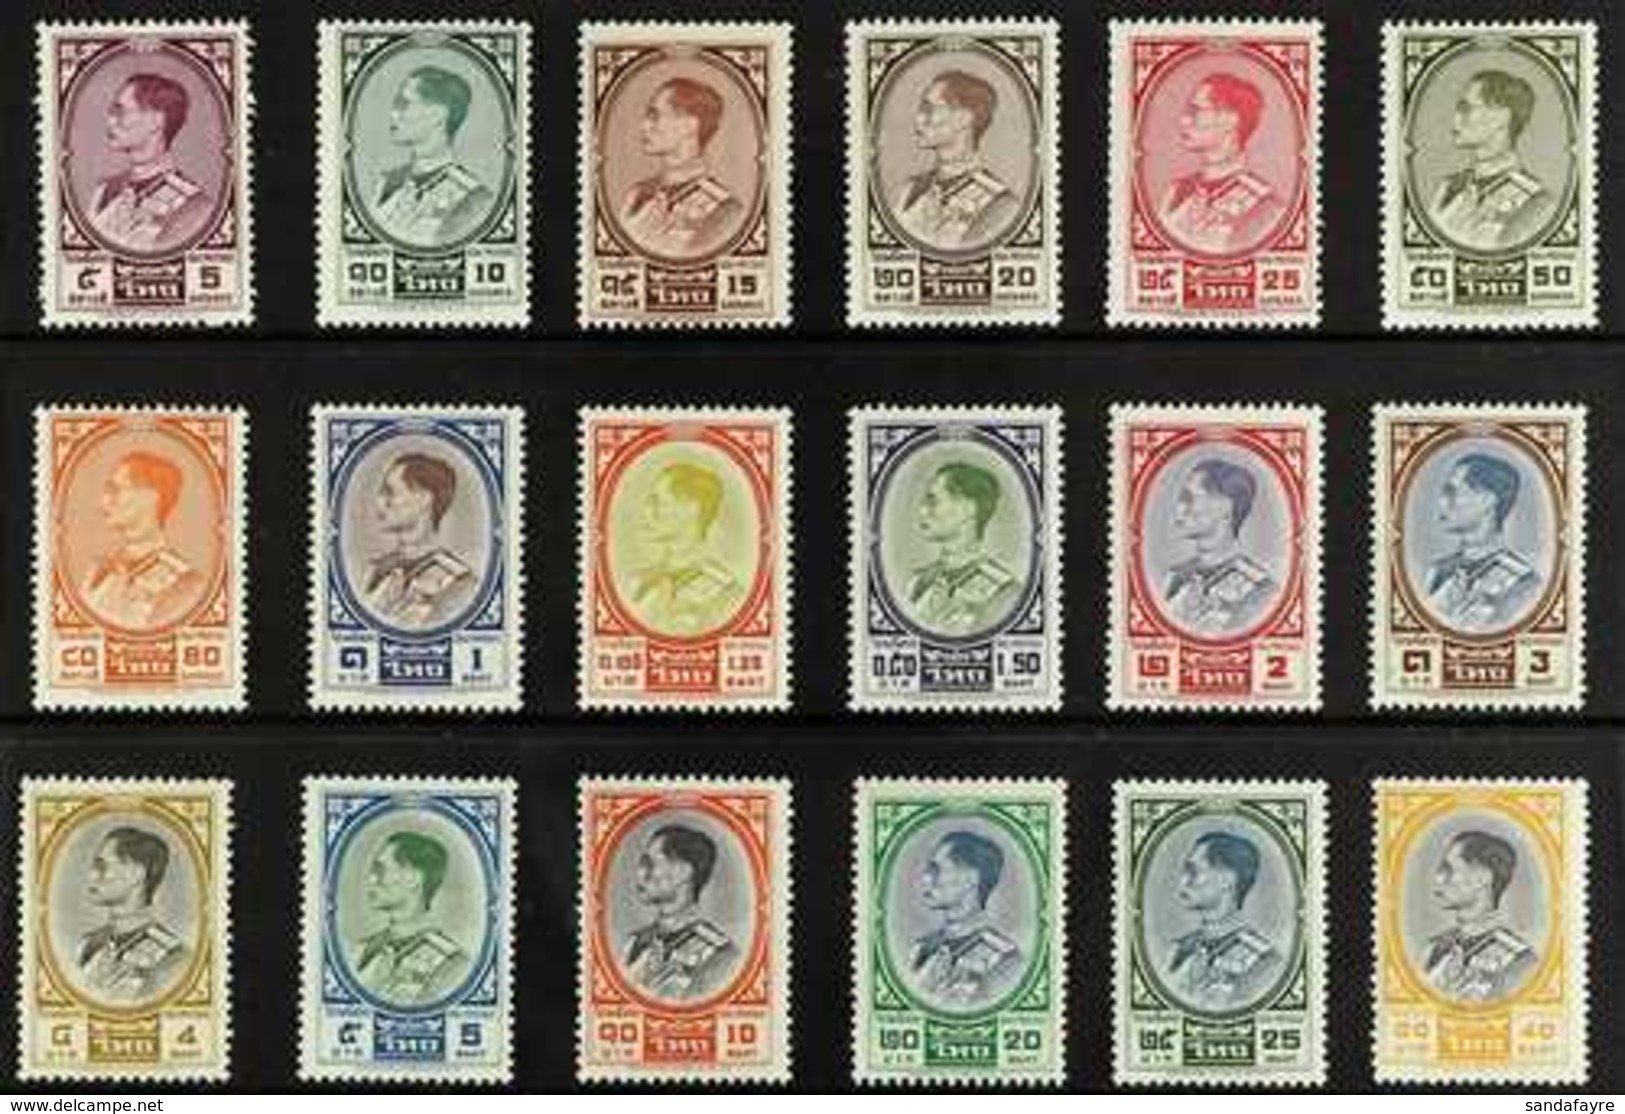 1961-68 King Bhumibol Definitive Set, Scott 348/362A, SG 422/39, Never Hinged Mint (18 Stamps) For More Images, Please V - Tailandia